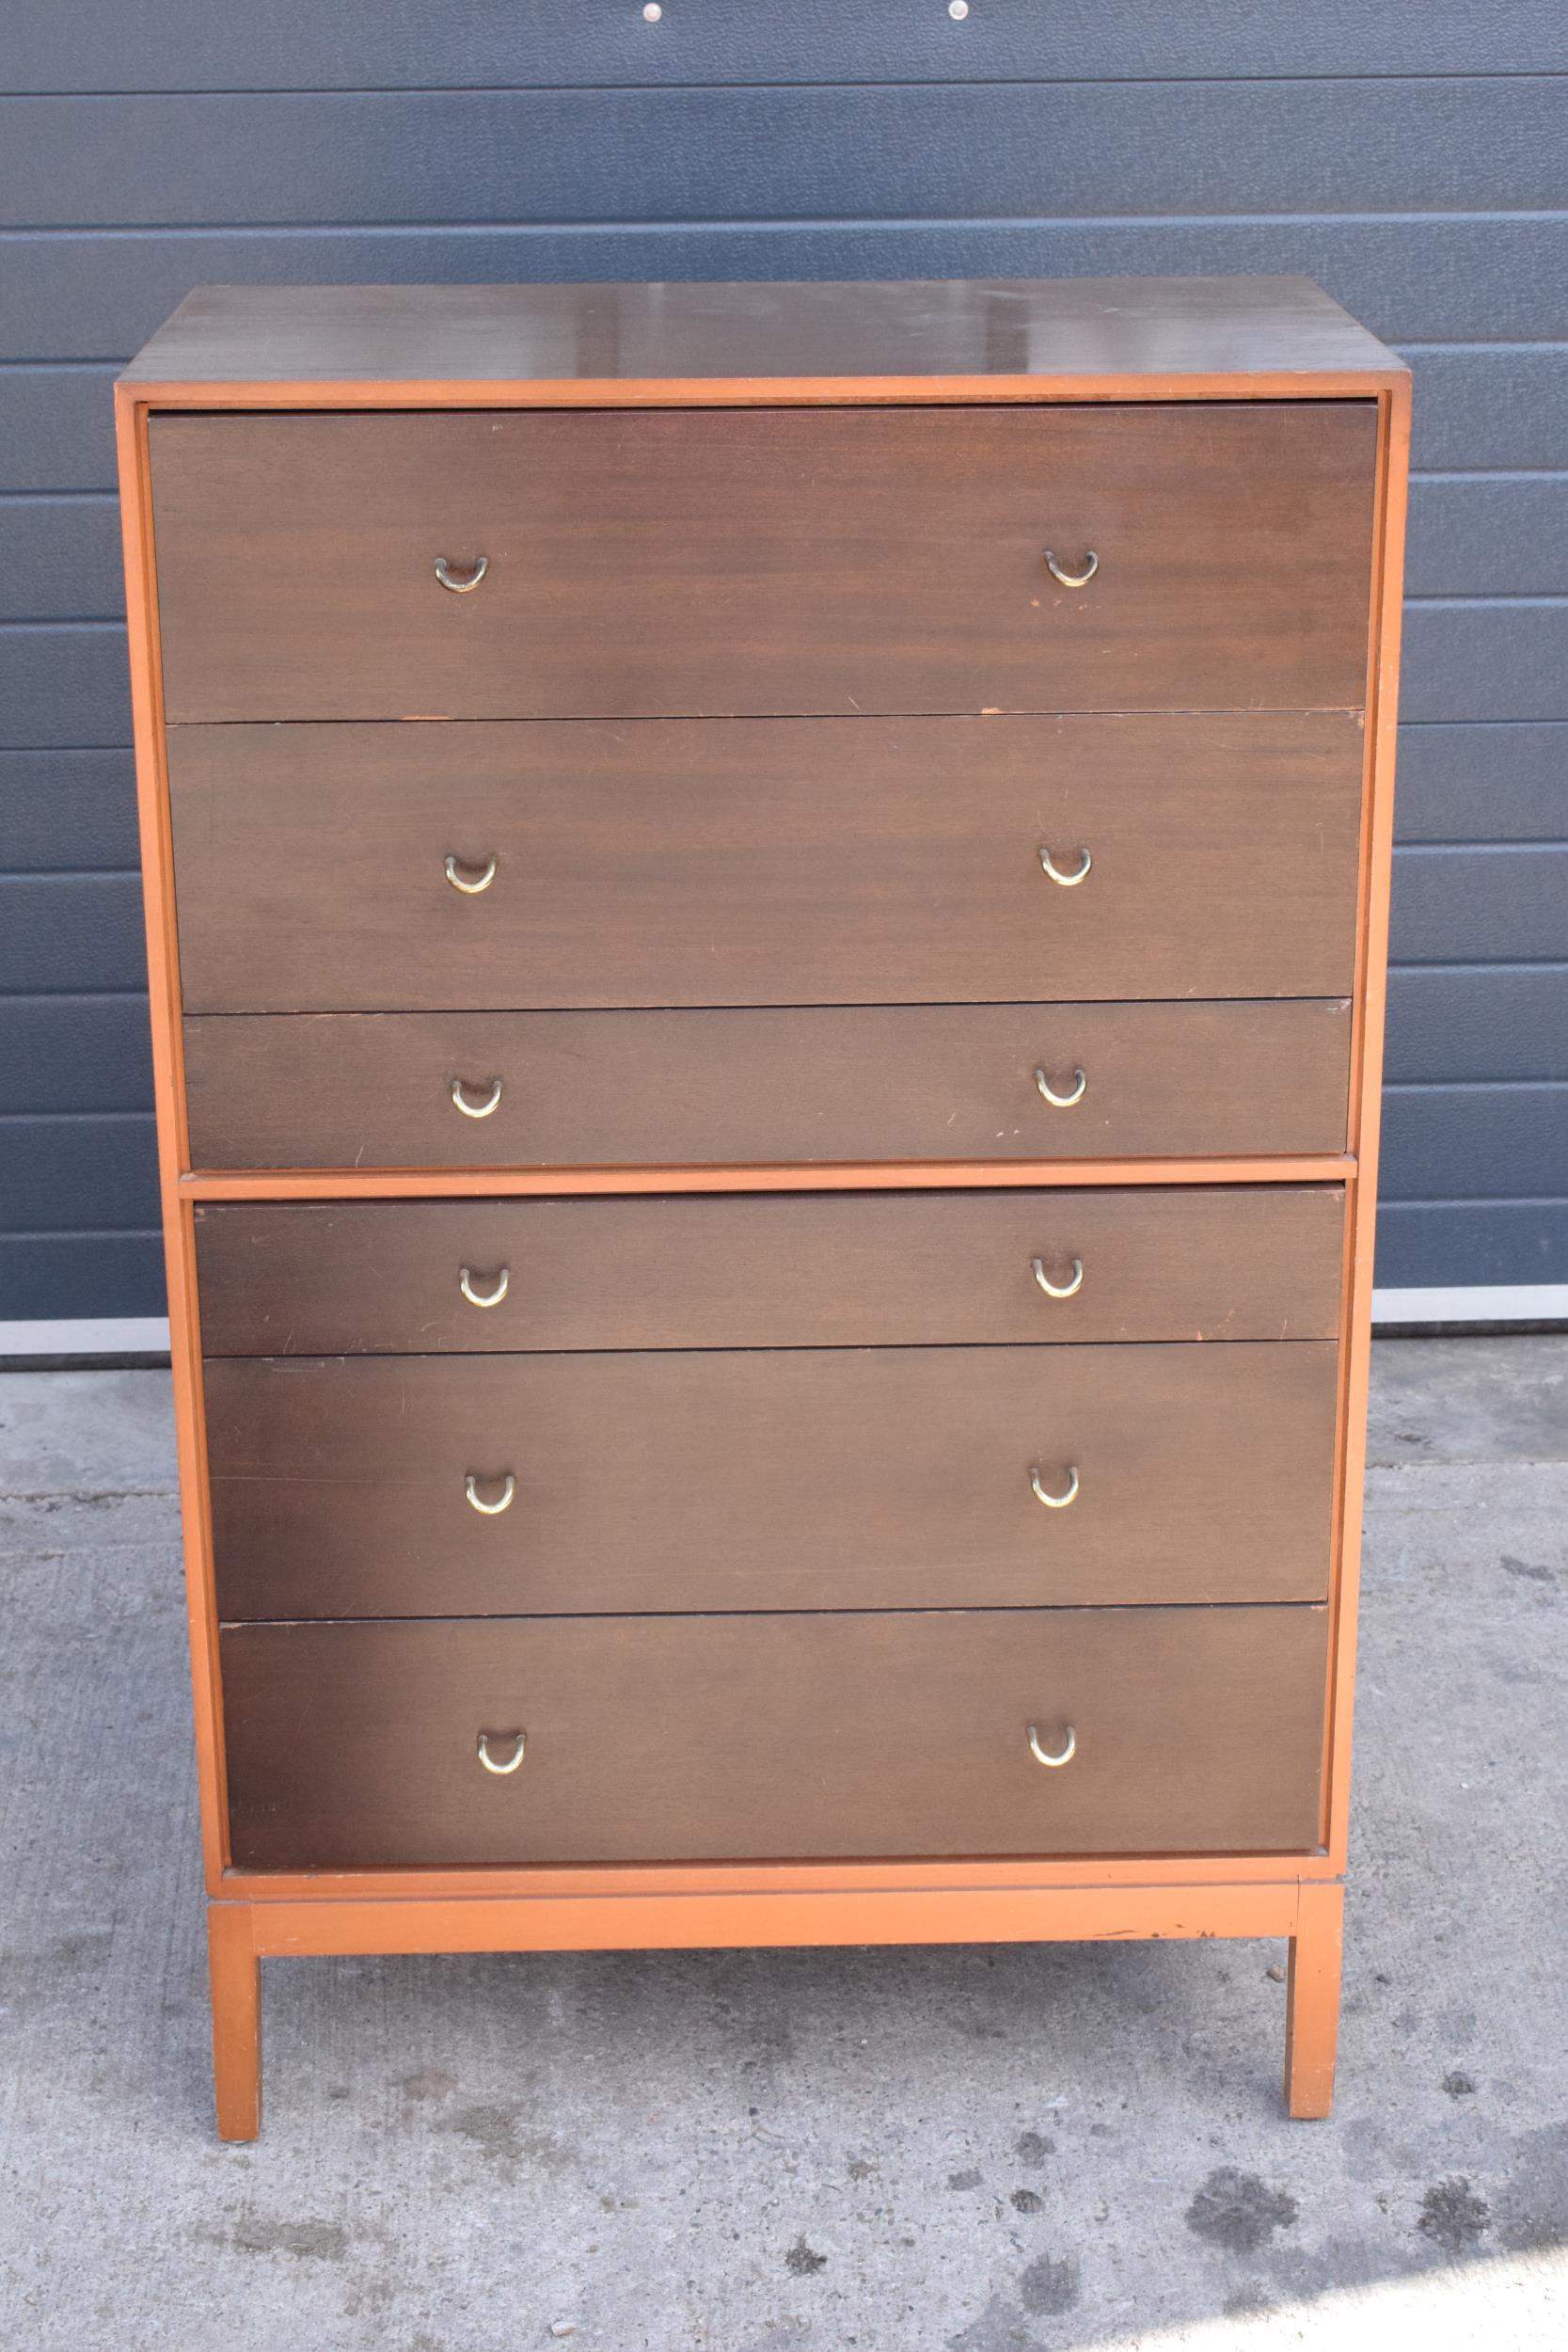 Stag mid century furniture chest of drawers / tall boy. 76 x 46 x 120cm tall. Age-related wear and